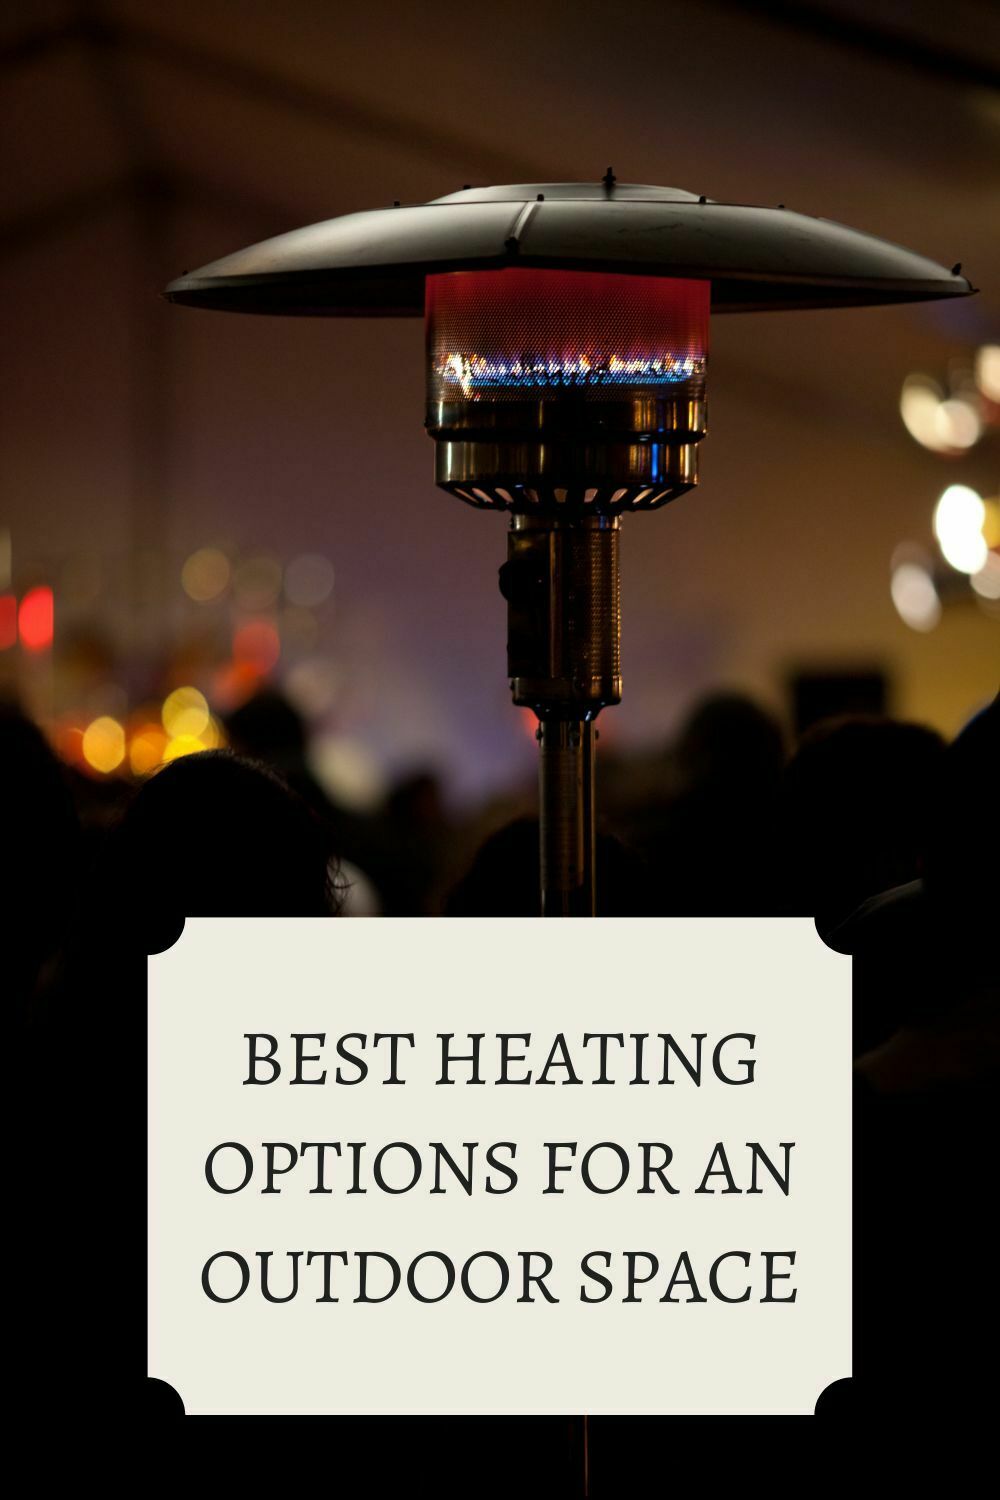 Best Heating Options for an Outdoor Space